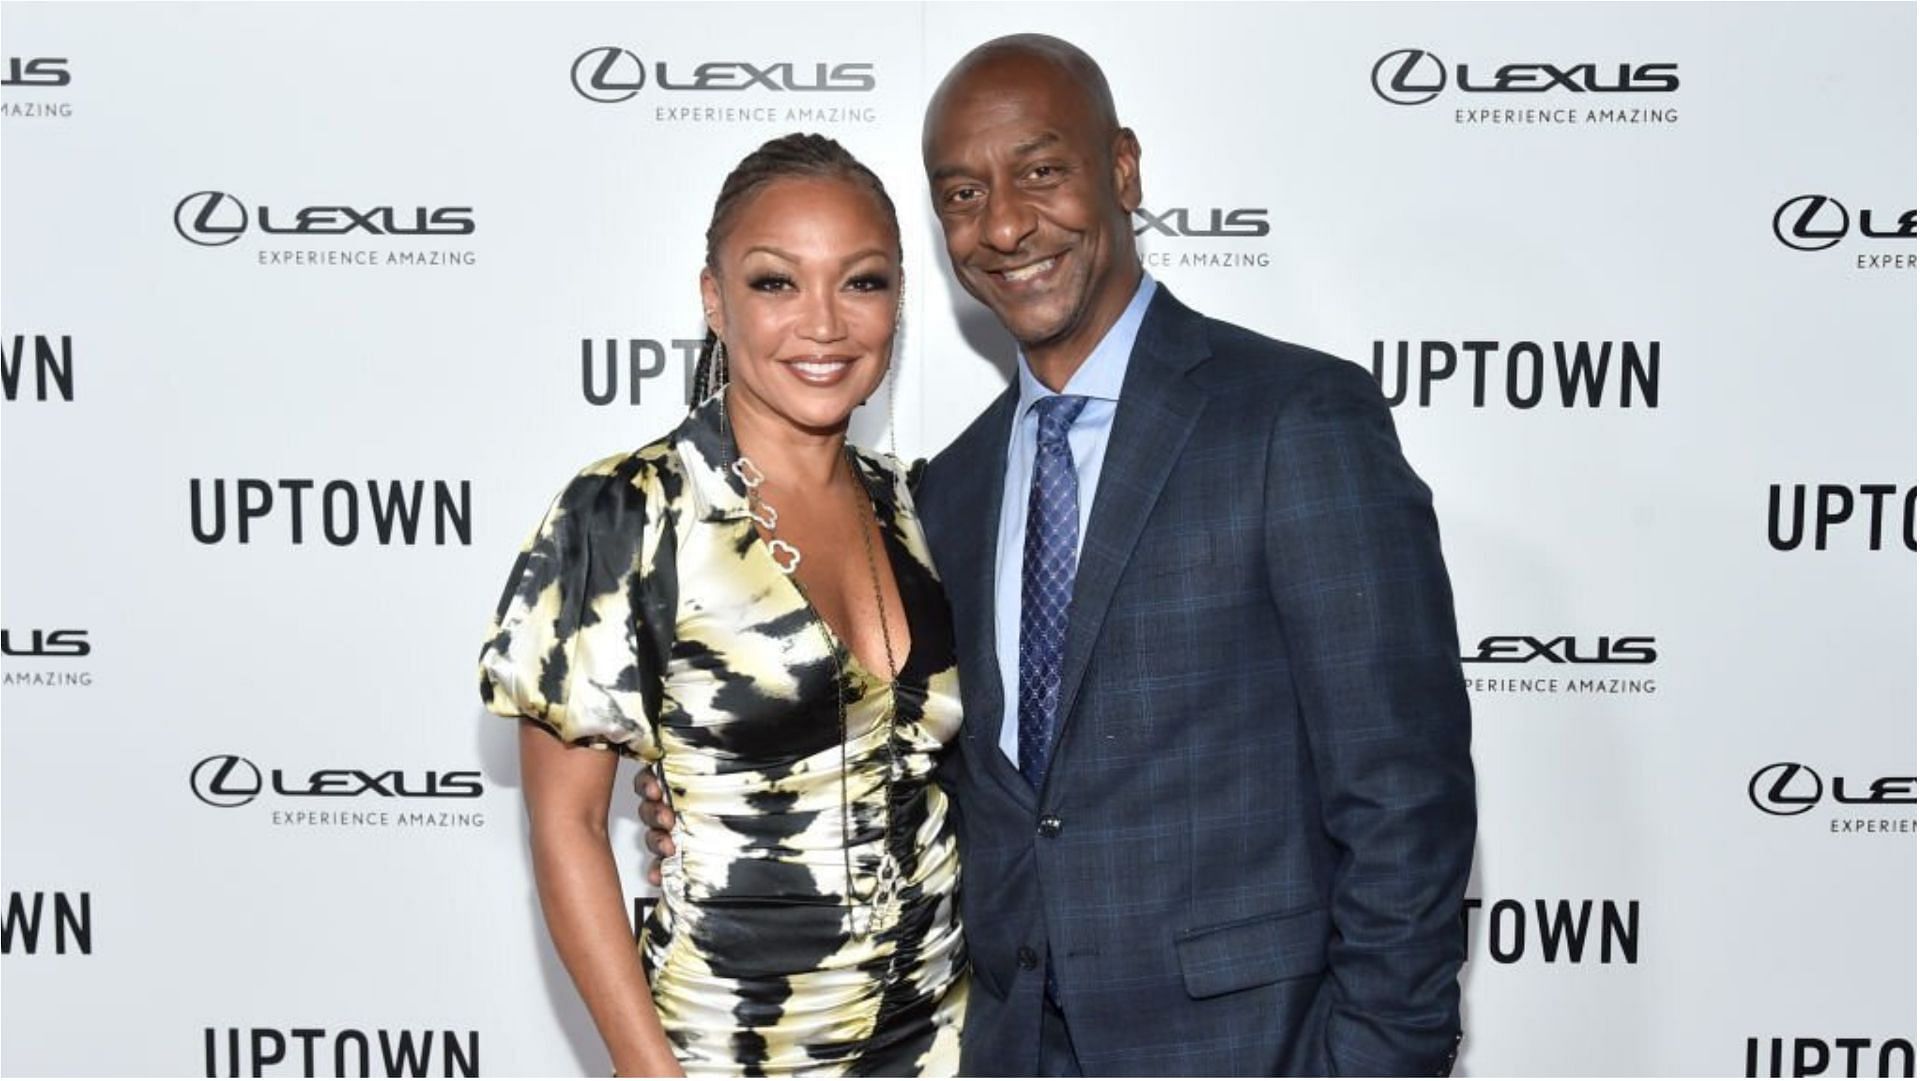 Chante Moore and Stephen Hill got engaged in 2021 (Image via Alberto E. Rodriguez/Getty Images)